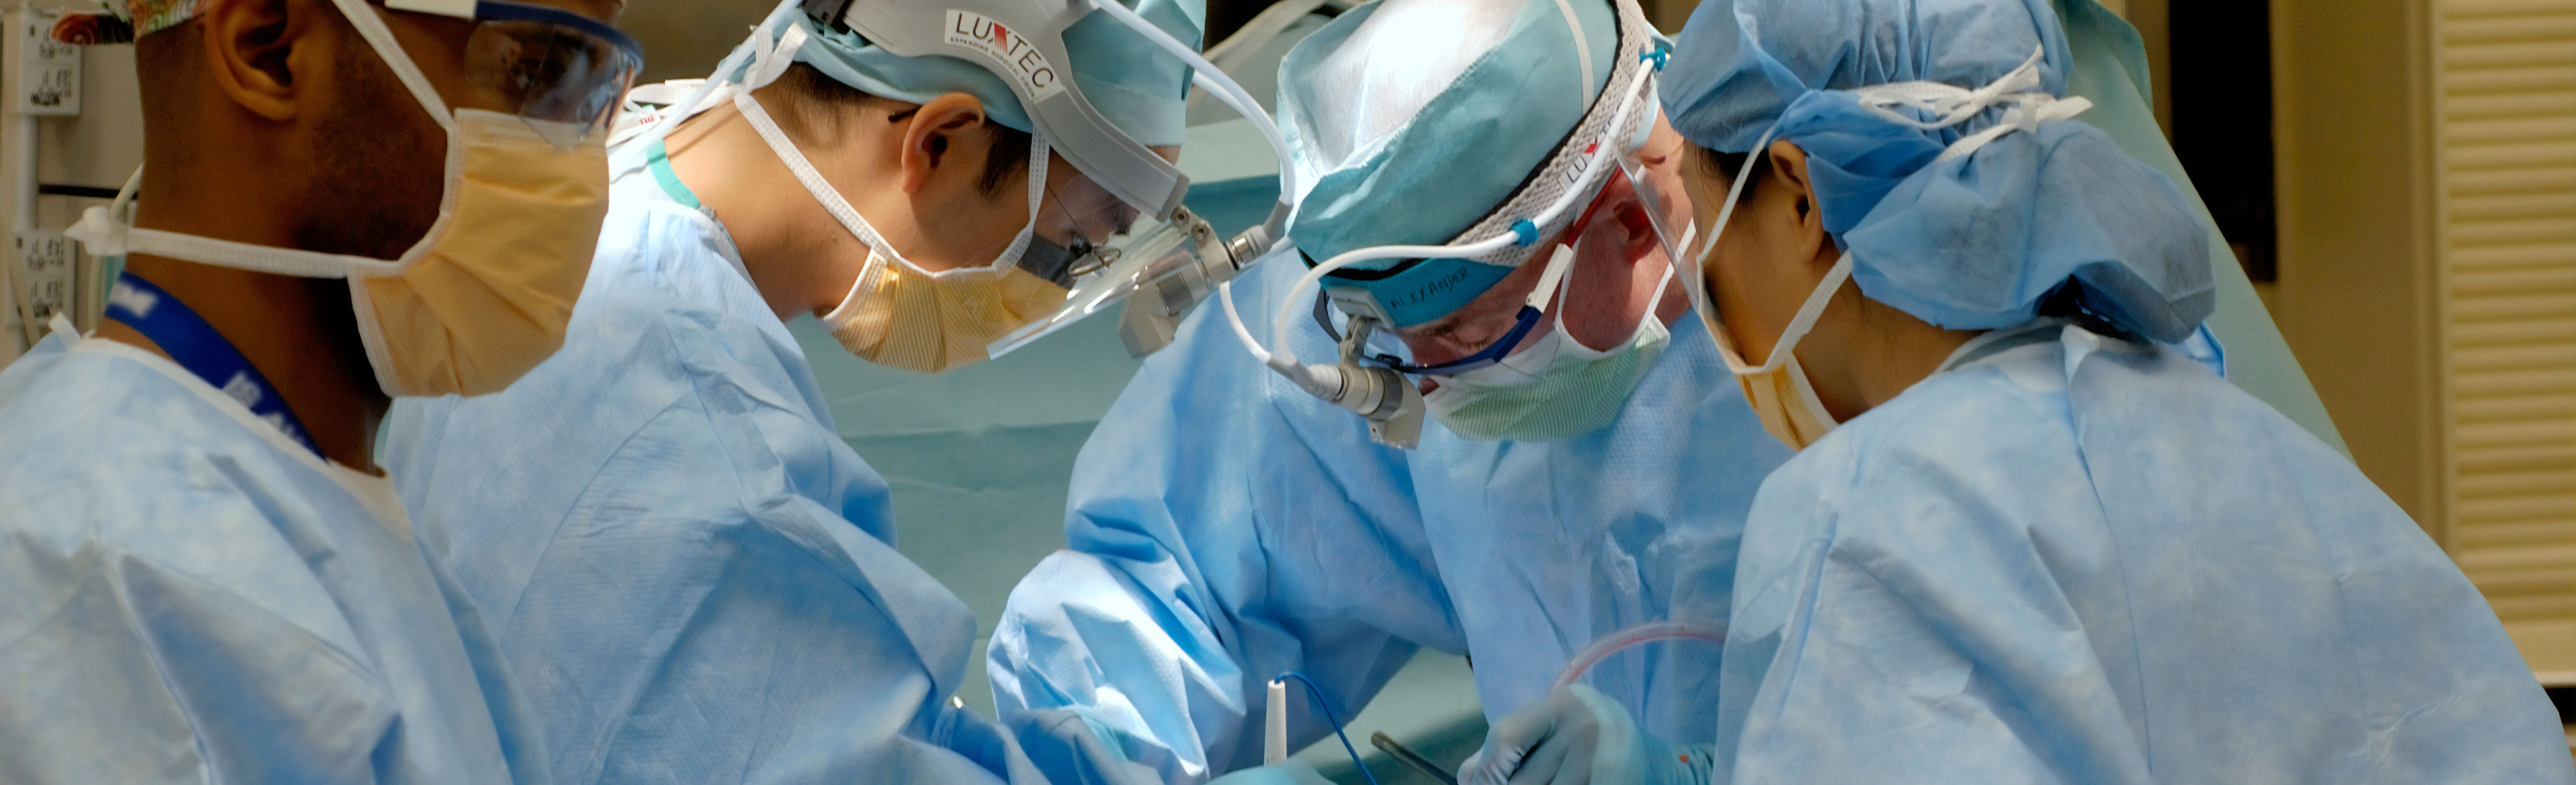 surgical team in an operating room